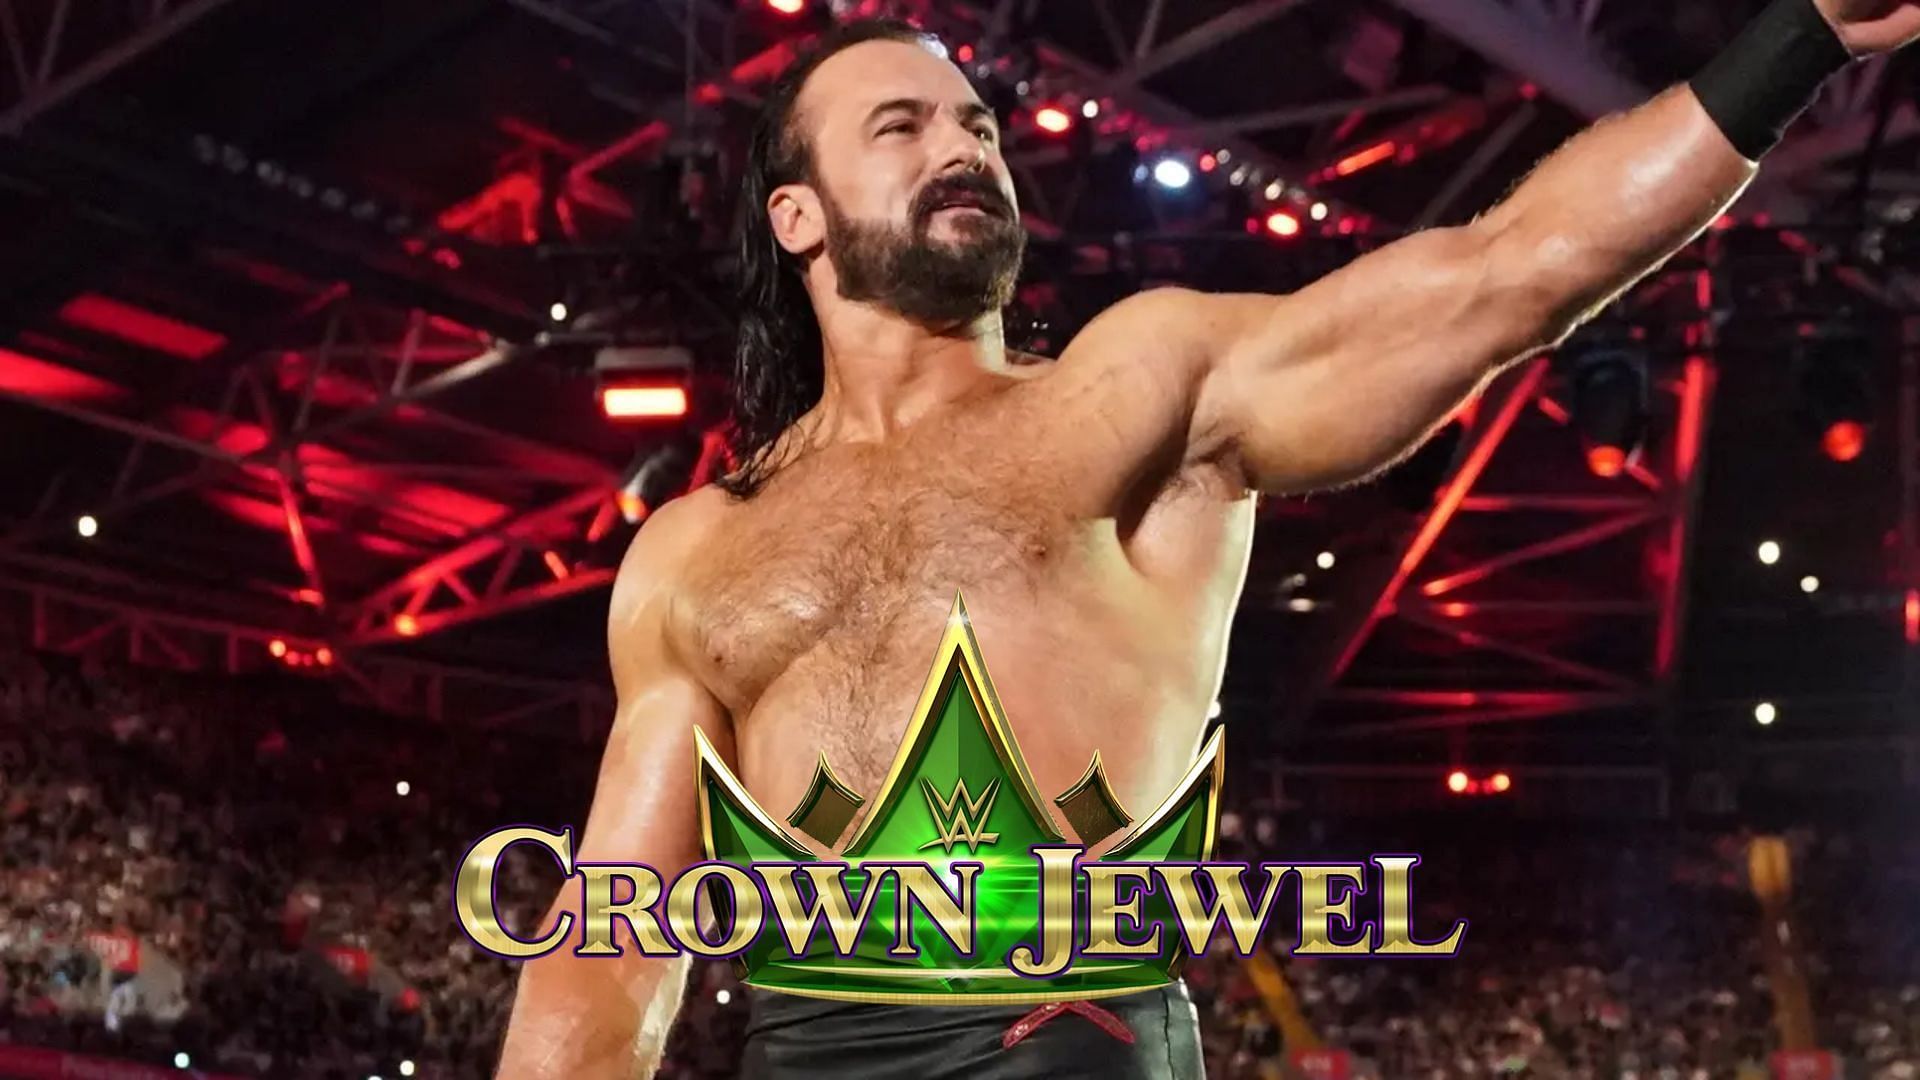 Will Drew McIntyre win his third world title at Crown Jewel?